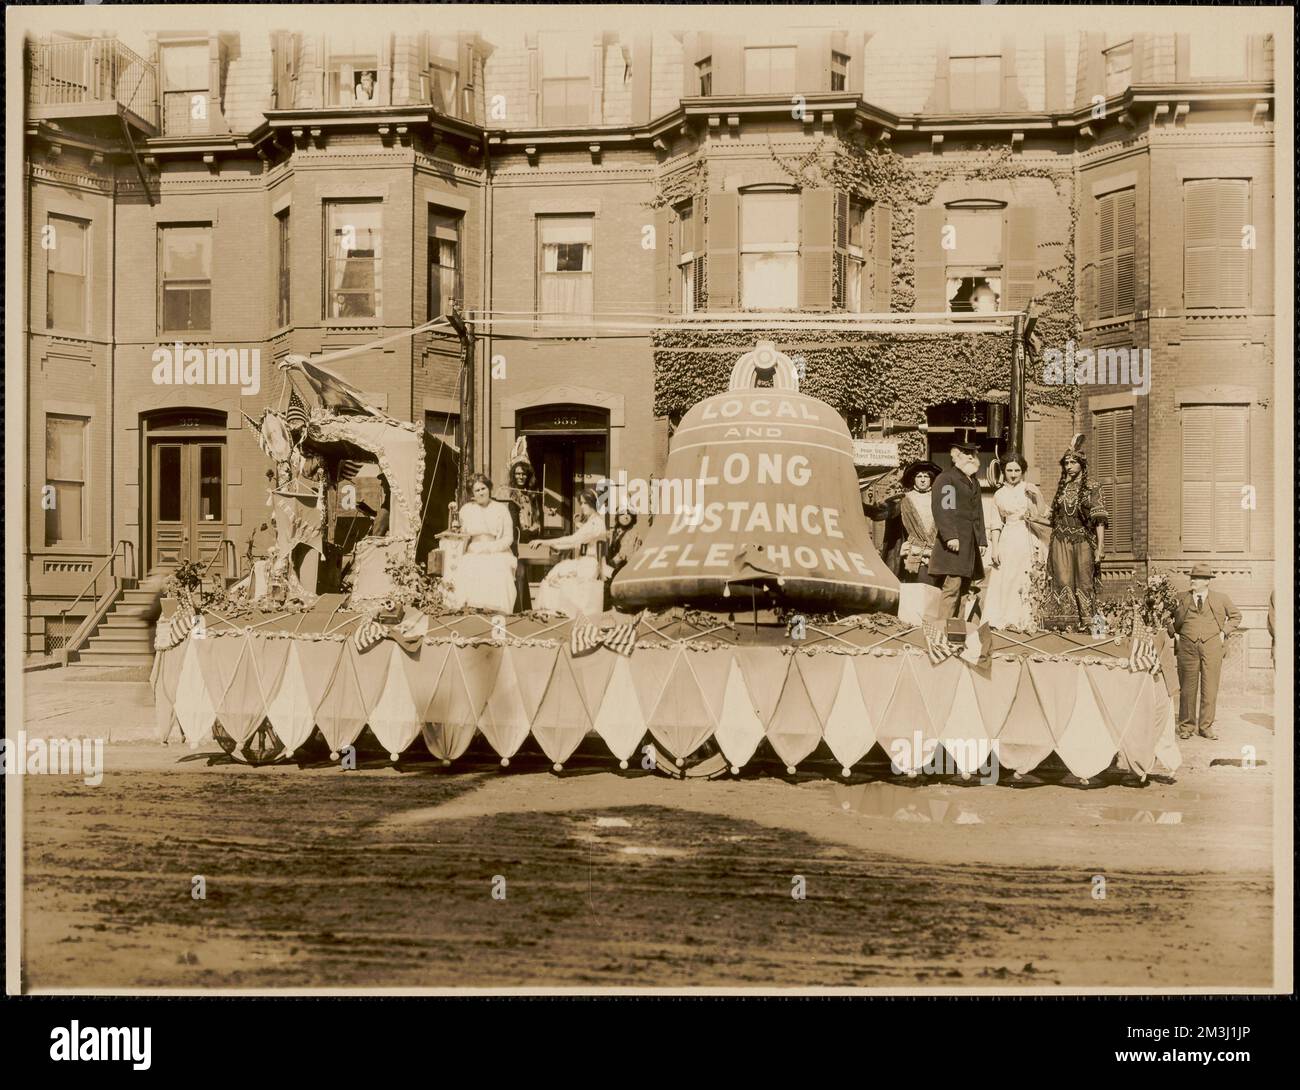 New England Telephone and Telegraph Co. float, Columbus Day Parade 1913 , Parades & processions, Floats Parades, Bells, Costumes, New England Telephone and Telegraph Company.  Leon Abdalian Collection Stock Photo